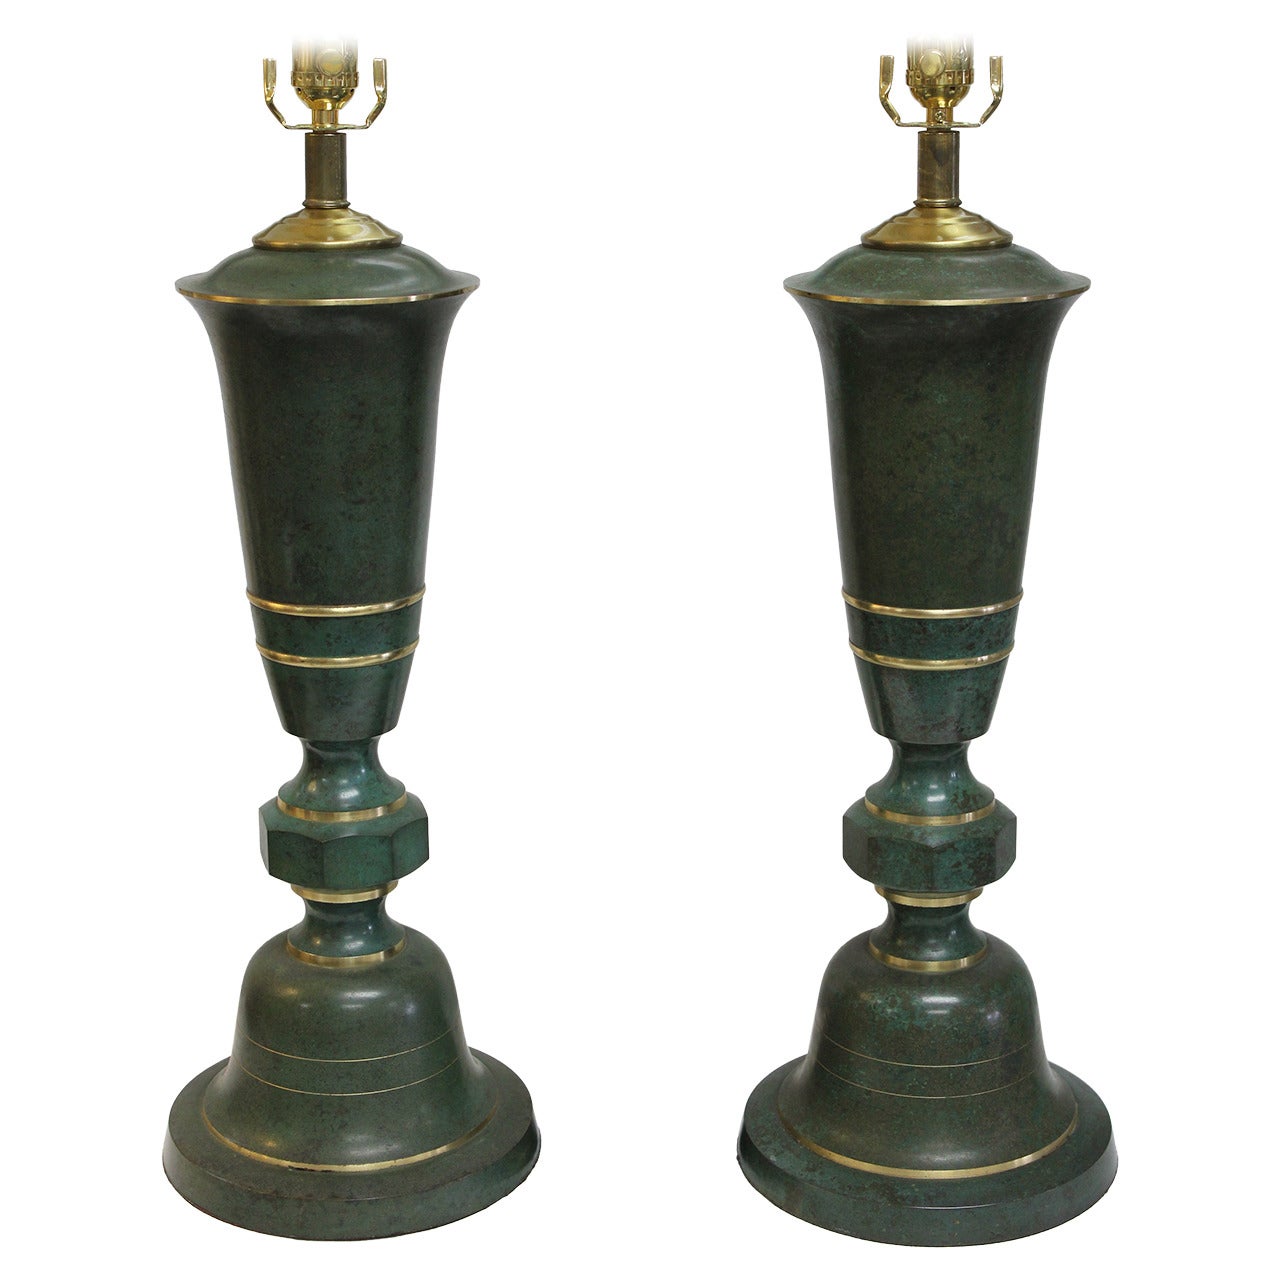 Lamps attributed to Carl Sorensen